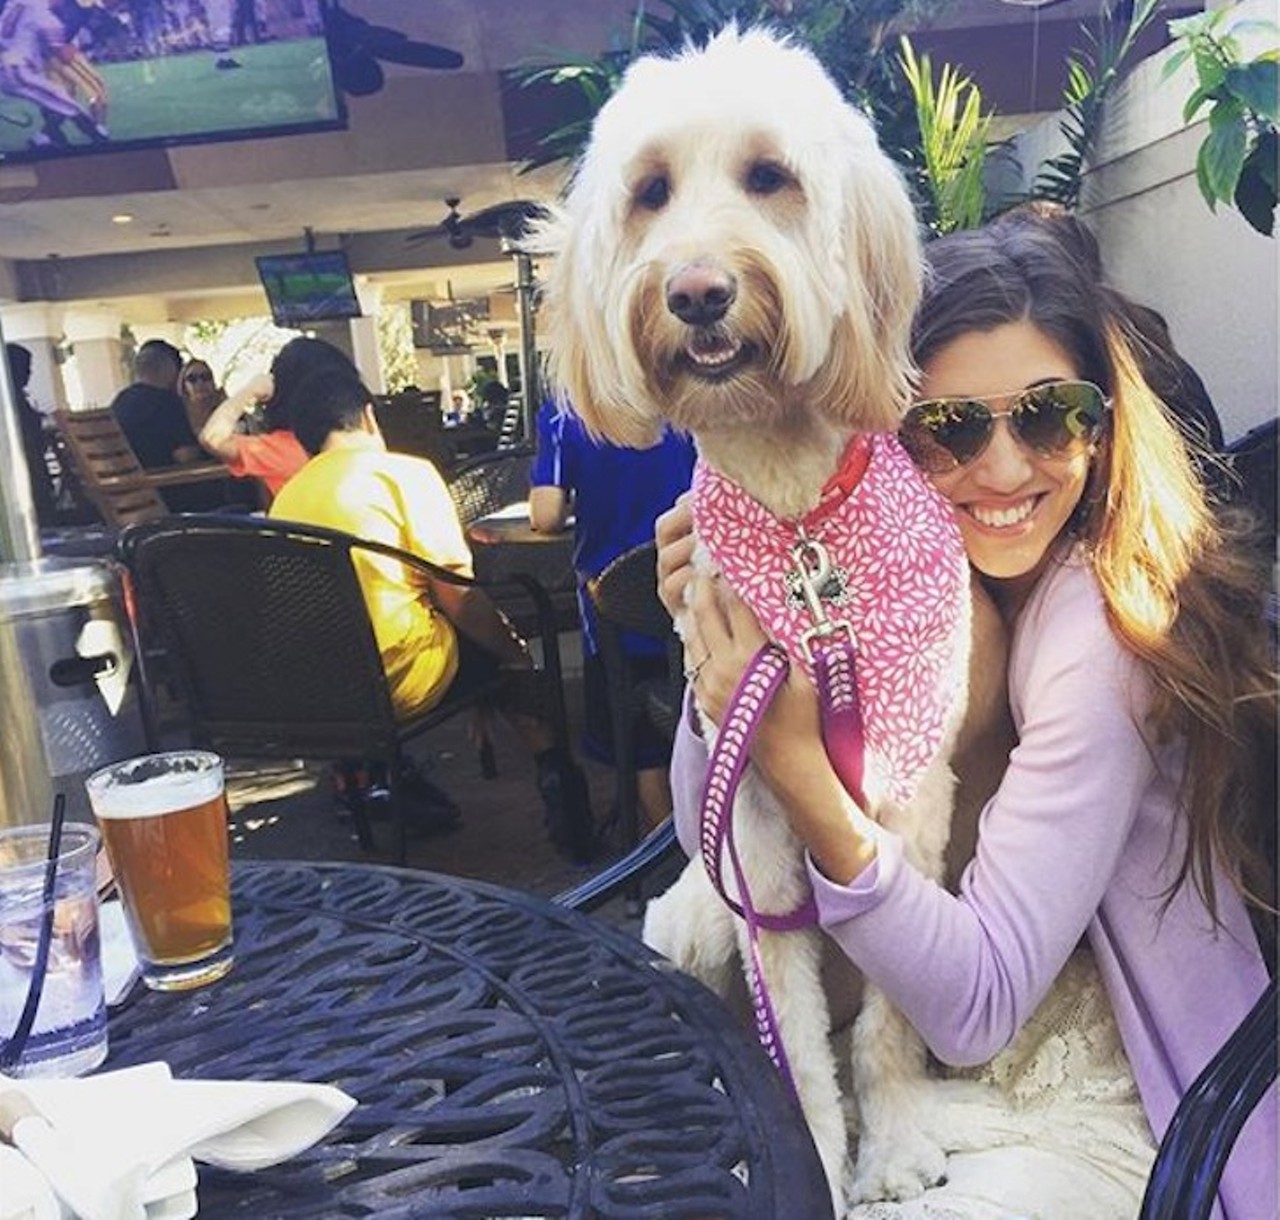 Teak Neighborhood Bar and Grill
6400 Times Square Ave. | 407-313-5111
Take a break from a night on the town with your furry friend and treat yourself to some locally crafted beers at Teak&#146;s.
Photo via jess_rae/Instagram